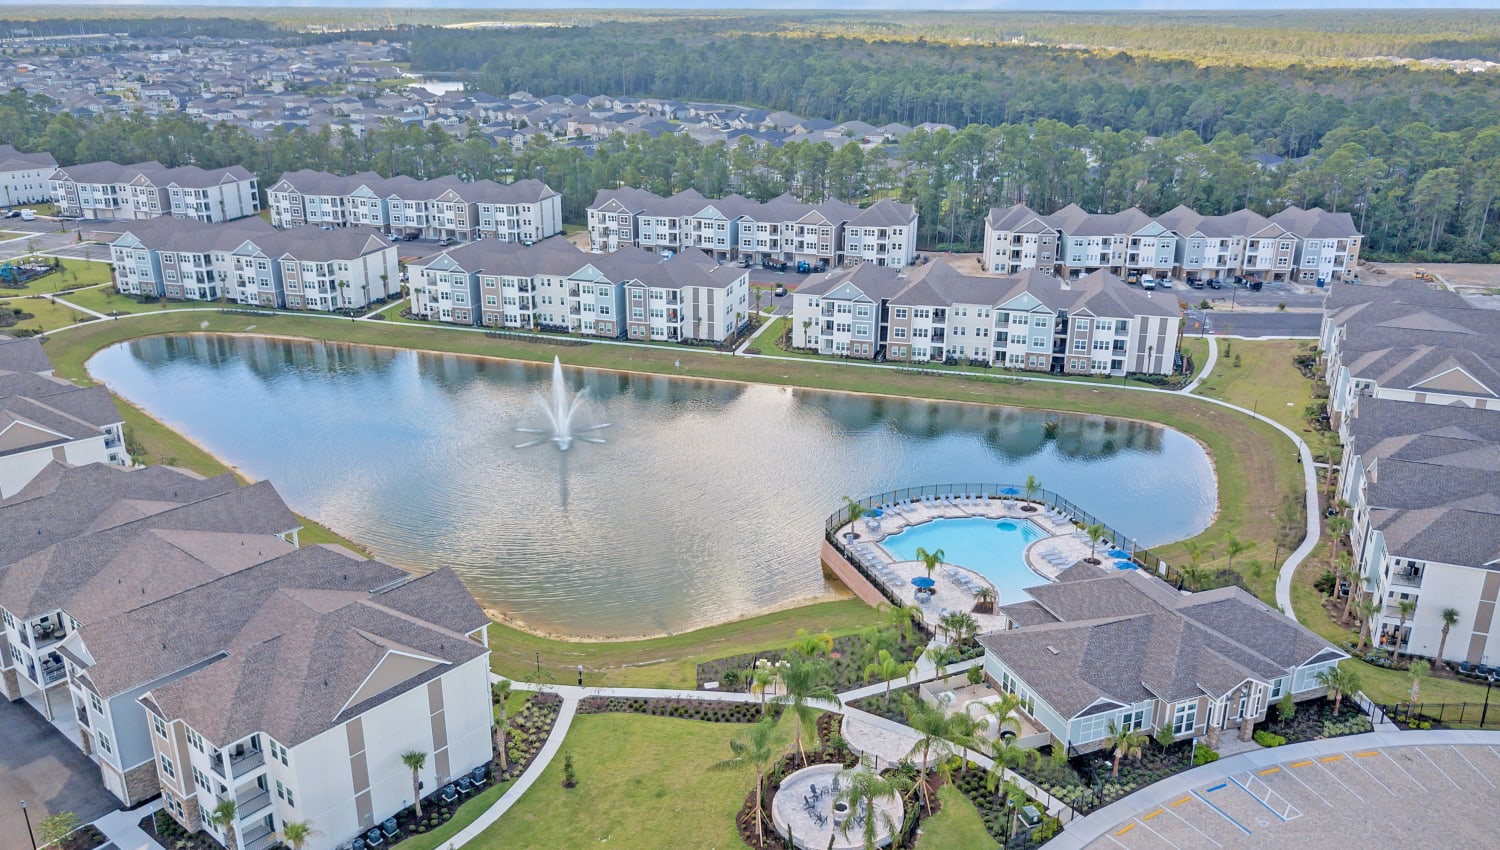 Aerial view of the community with pool and lake at Lakeline at Bartram Park in Jacksonville, Florida